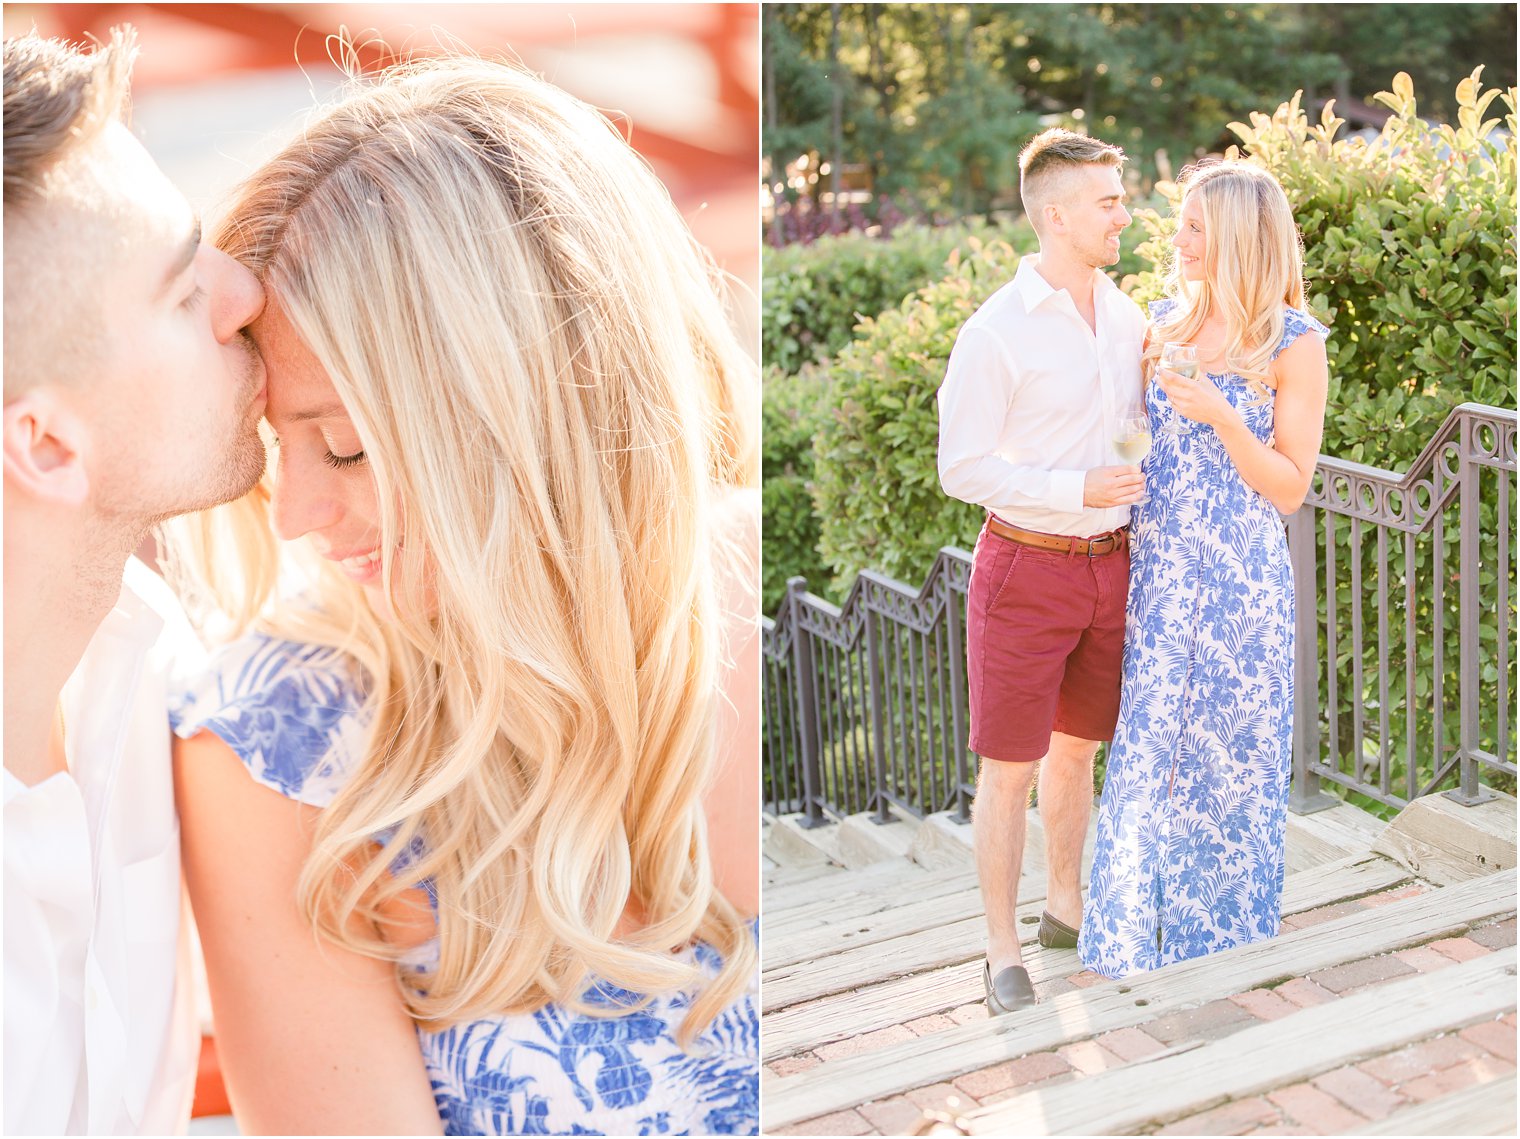 outdoor engagement session with New Jersey wedding photographer Idalia Photography